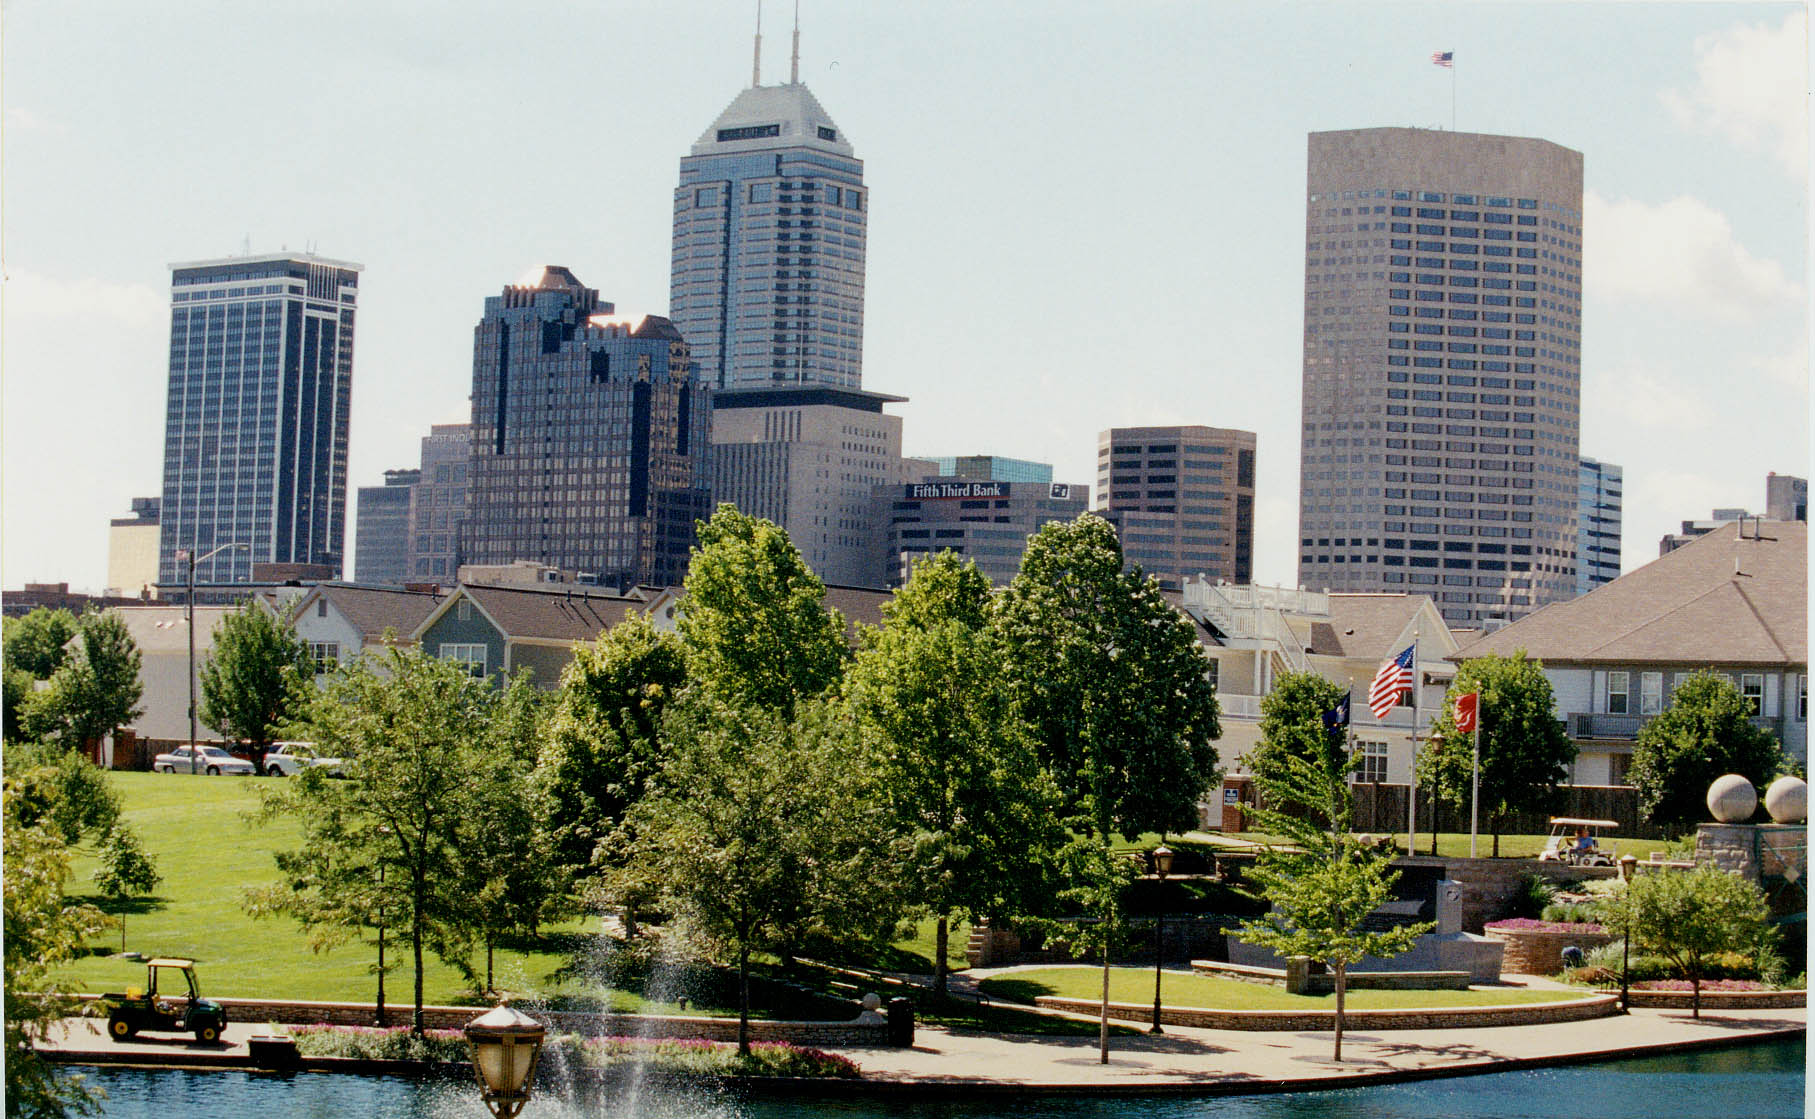 Indianapolis is the capital and largest city in Indiana